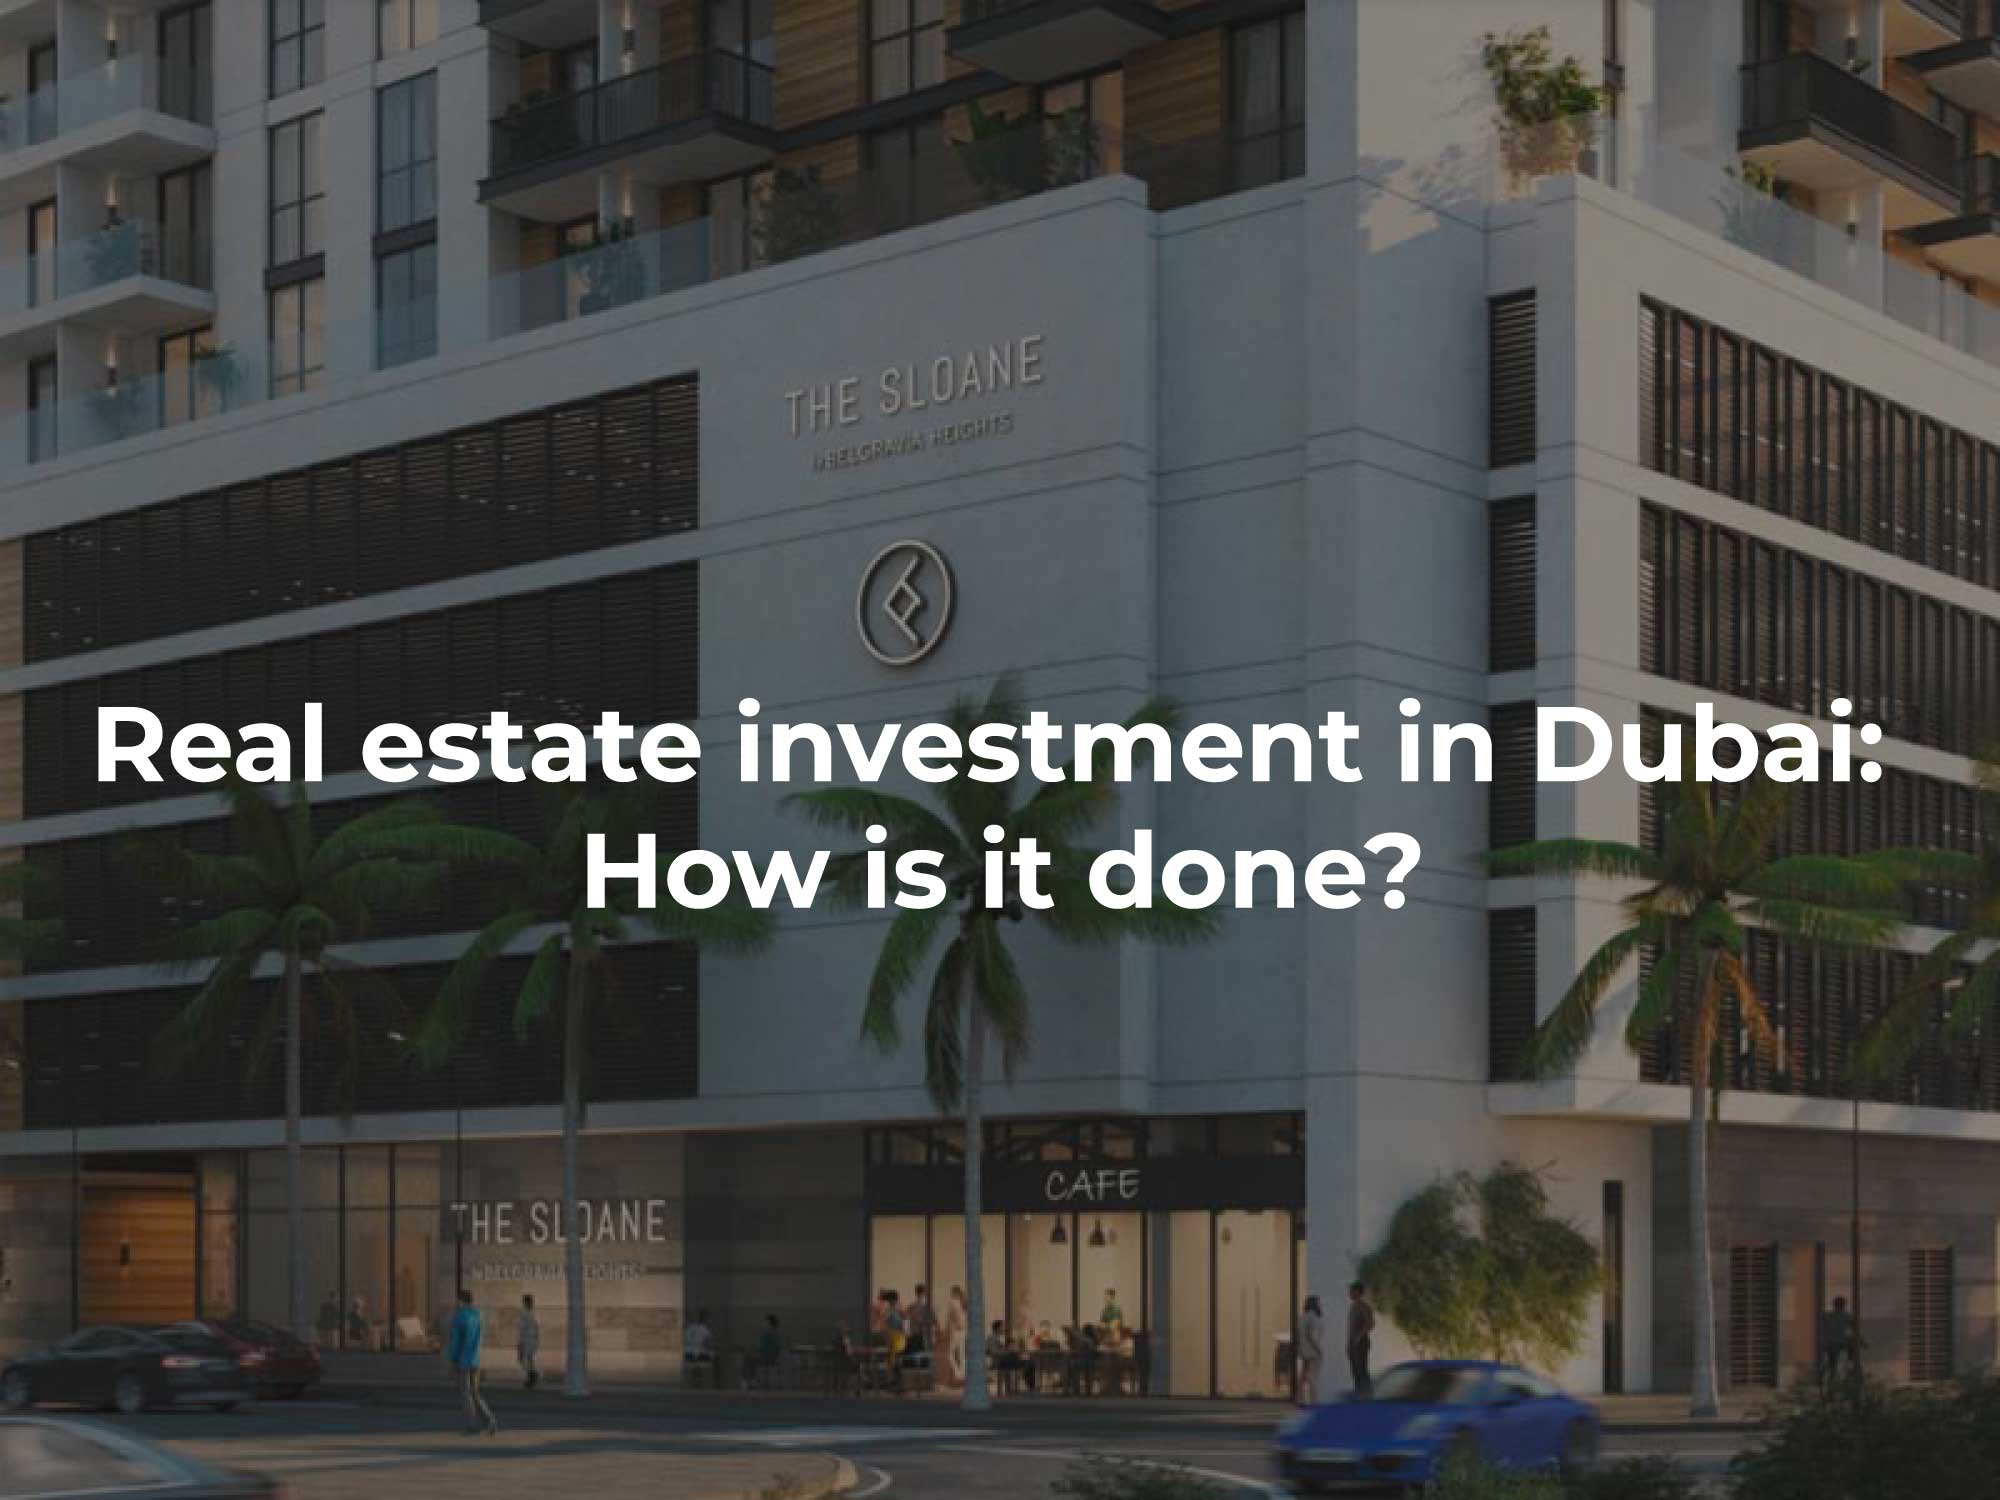 Real estate investment in Dubai: How is it done?